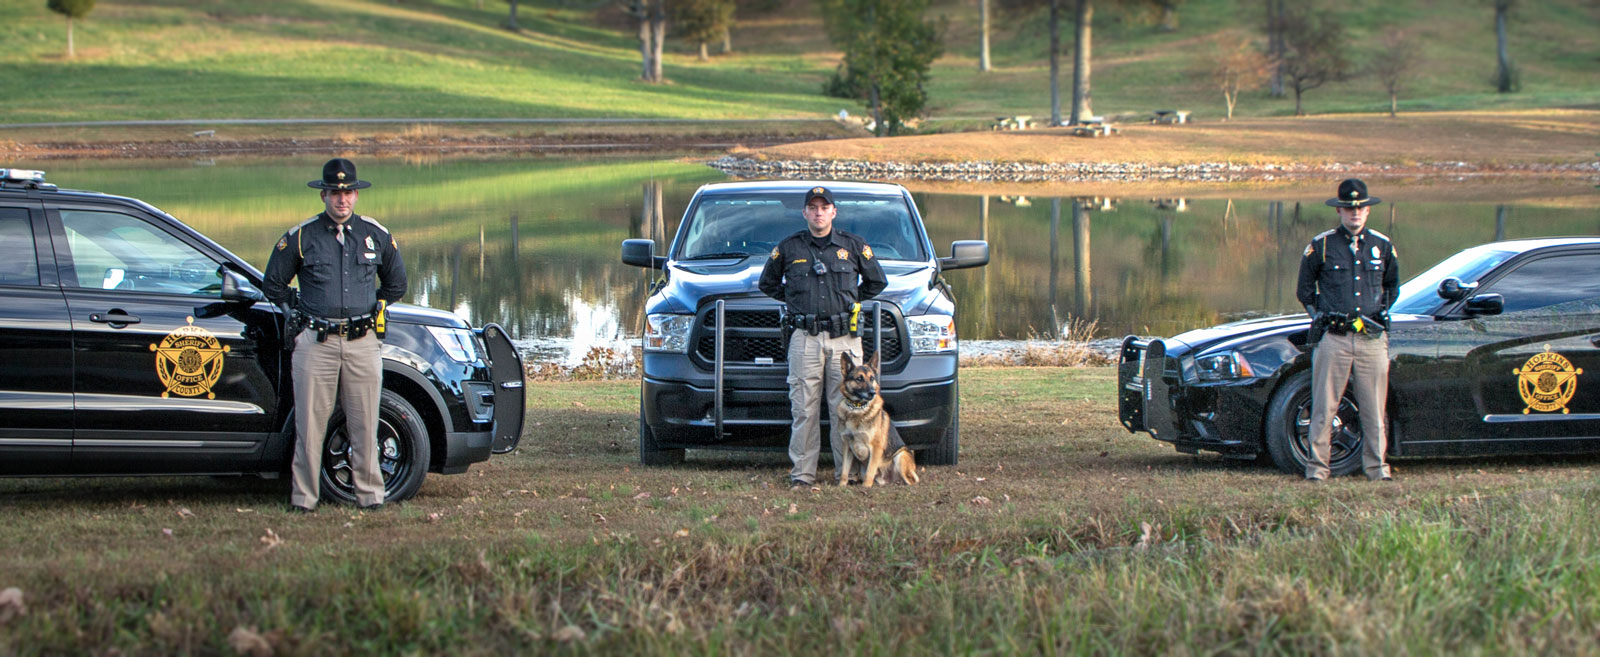 Photo with Vehicles, officers, and a k9